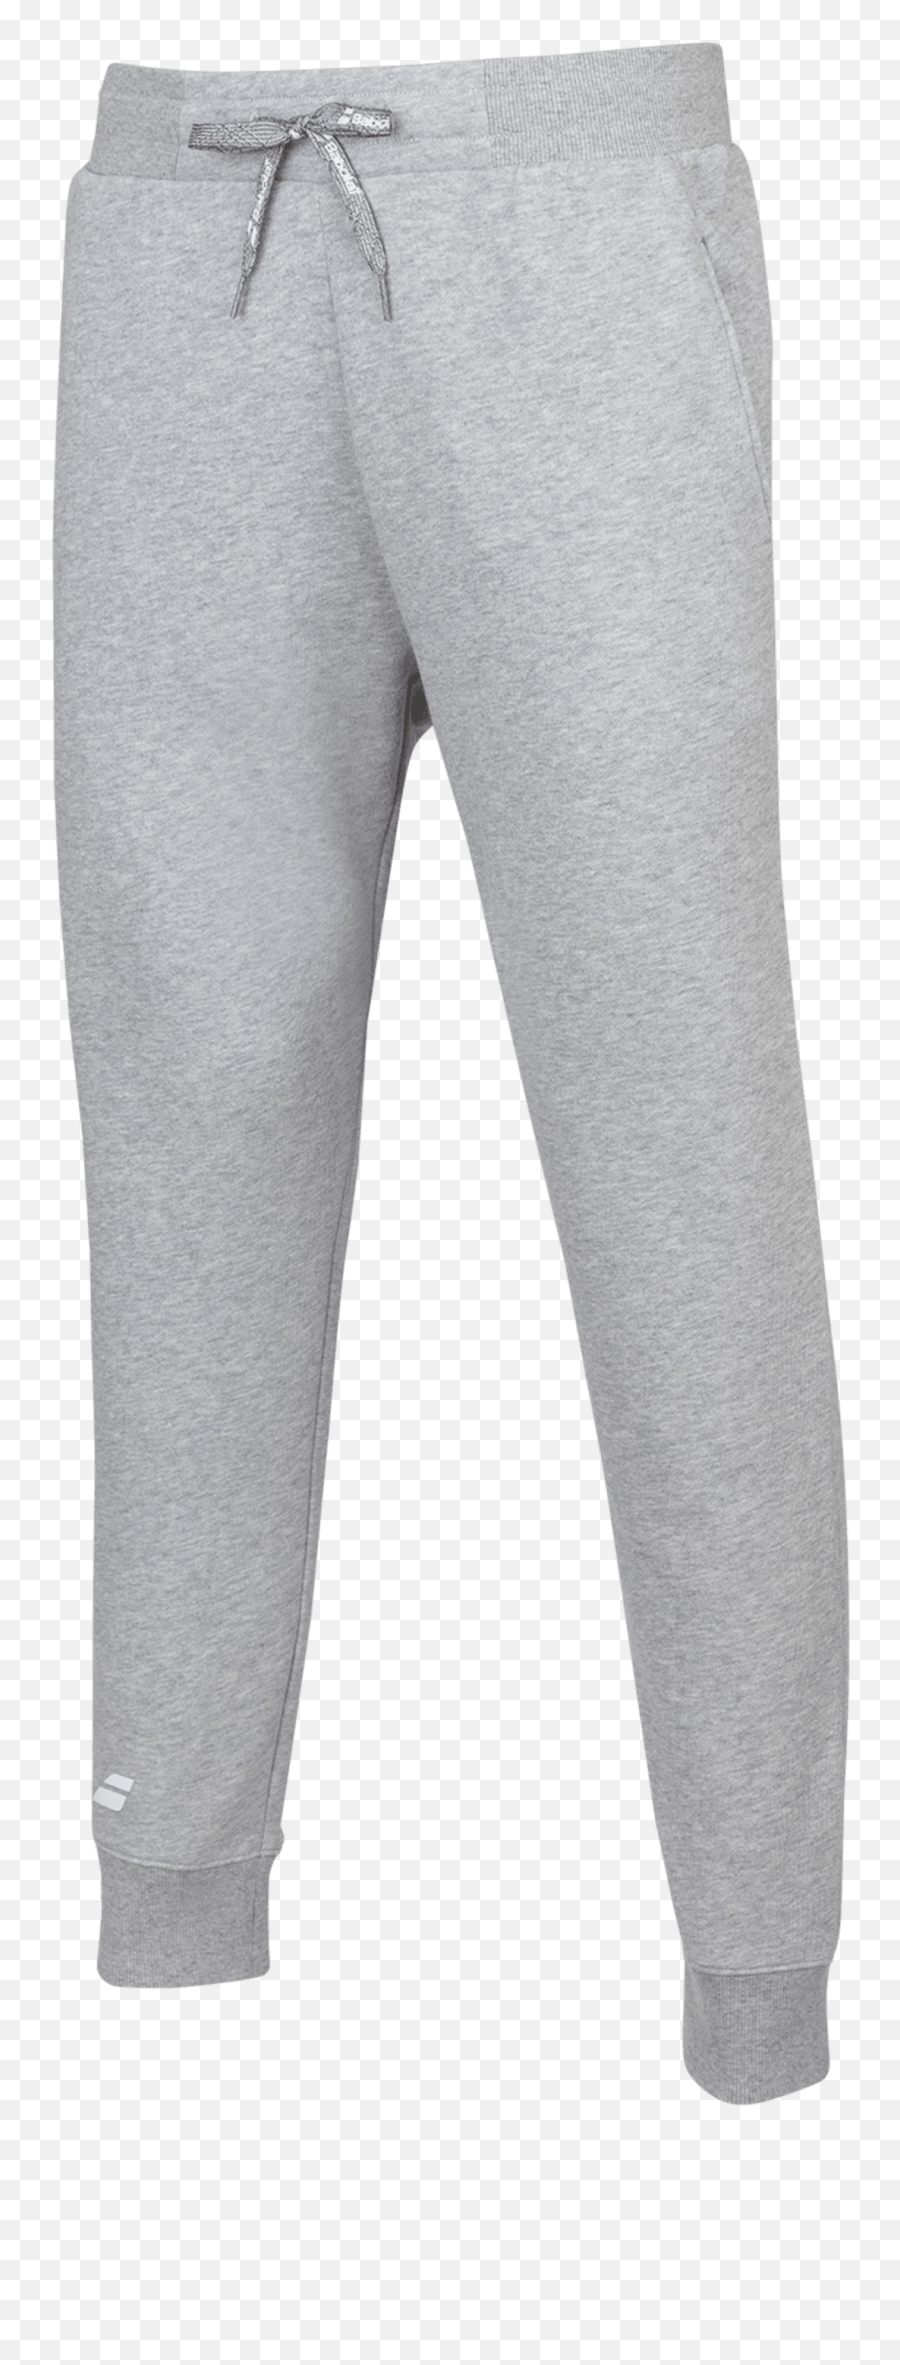 Exercise Jogger Pant - Sweatpants Png,What Is The White With Grey Stripes Google Play Icon Used For